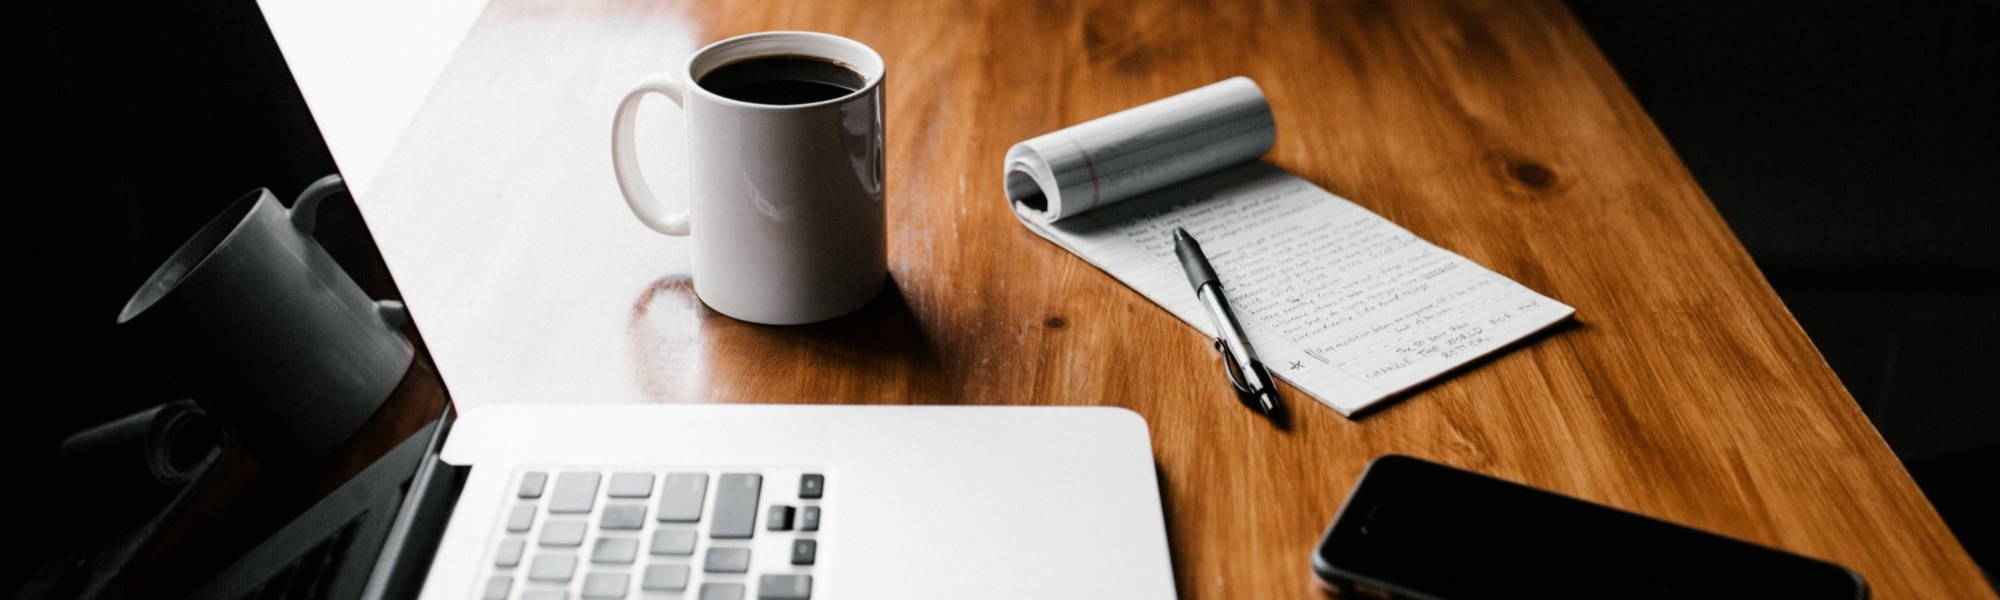 A lap top sits open on a desk alongside a mug and notebook and pen